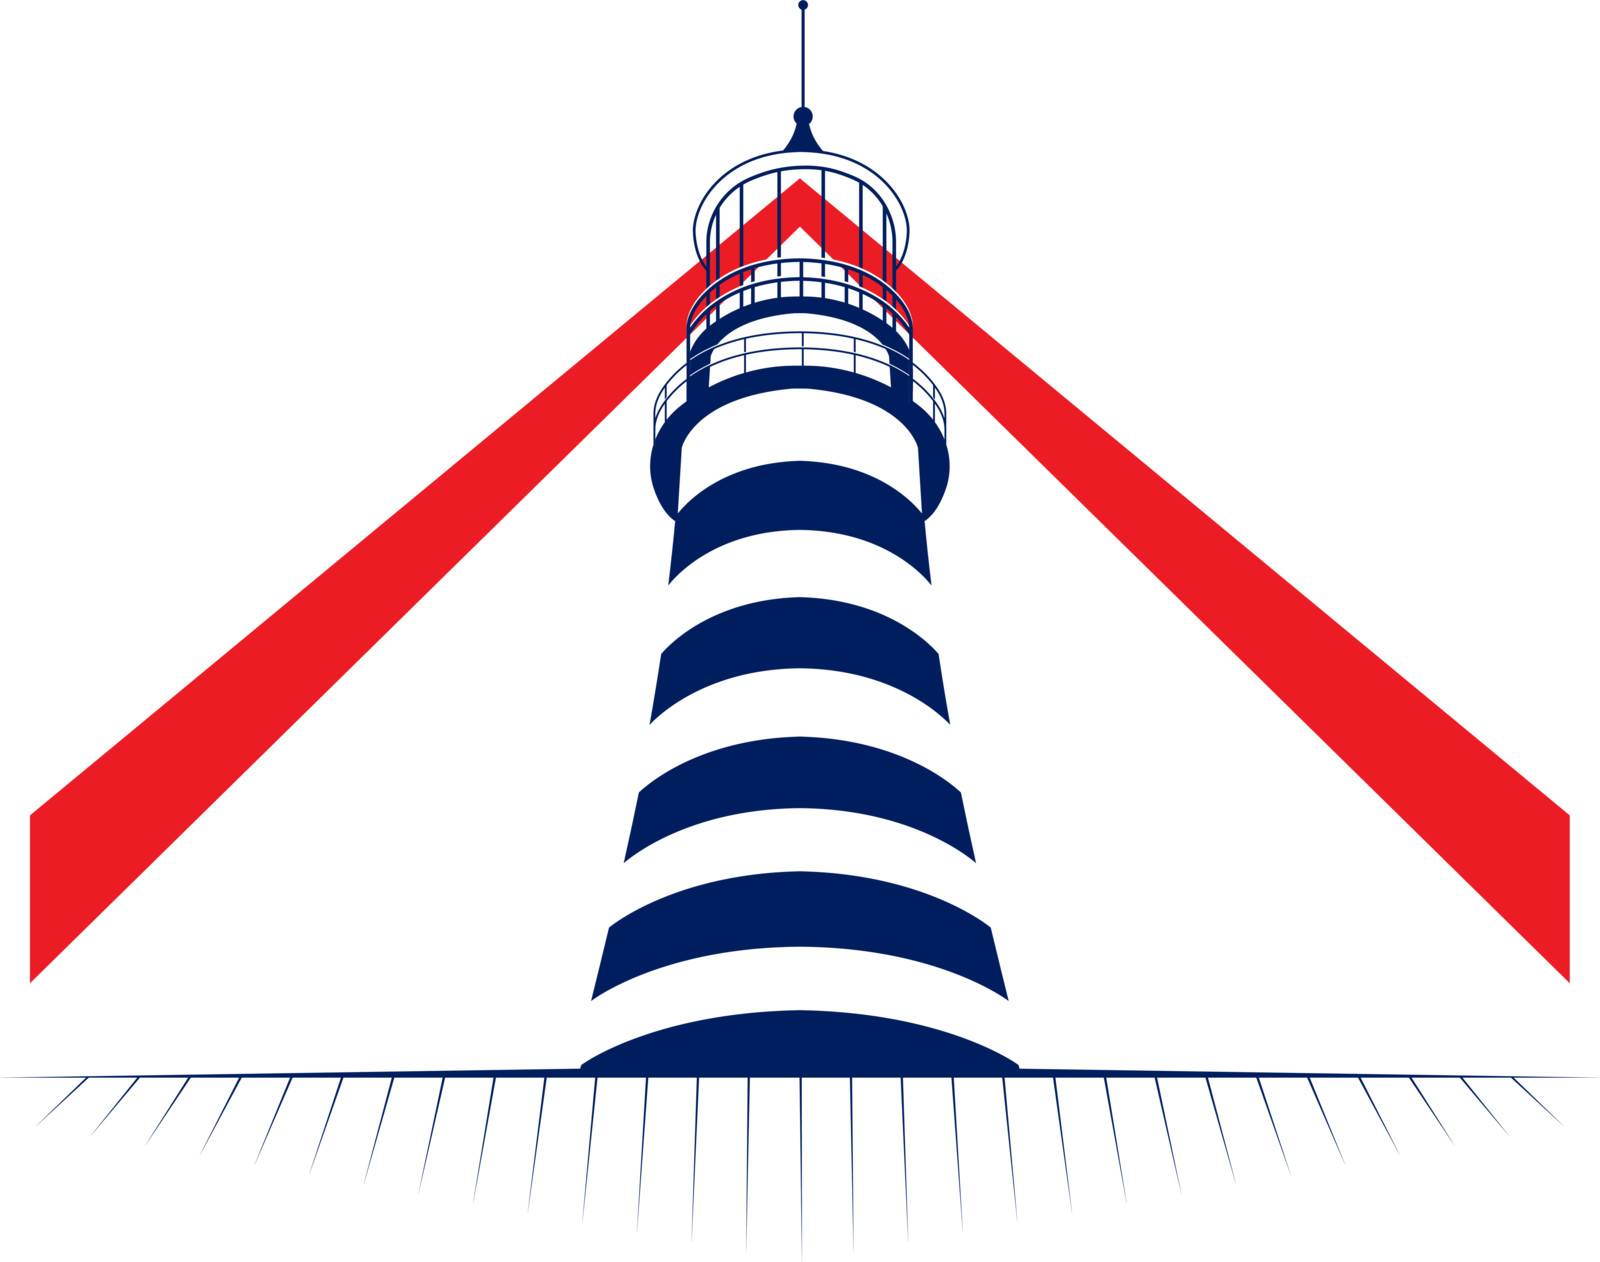 lamp of lighthouse tower icon 